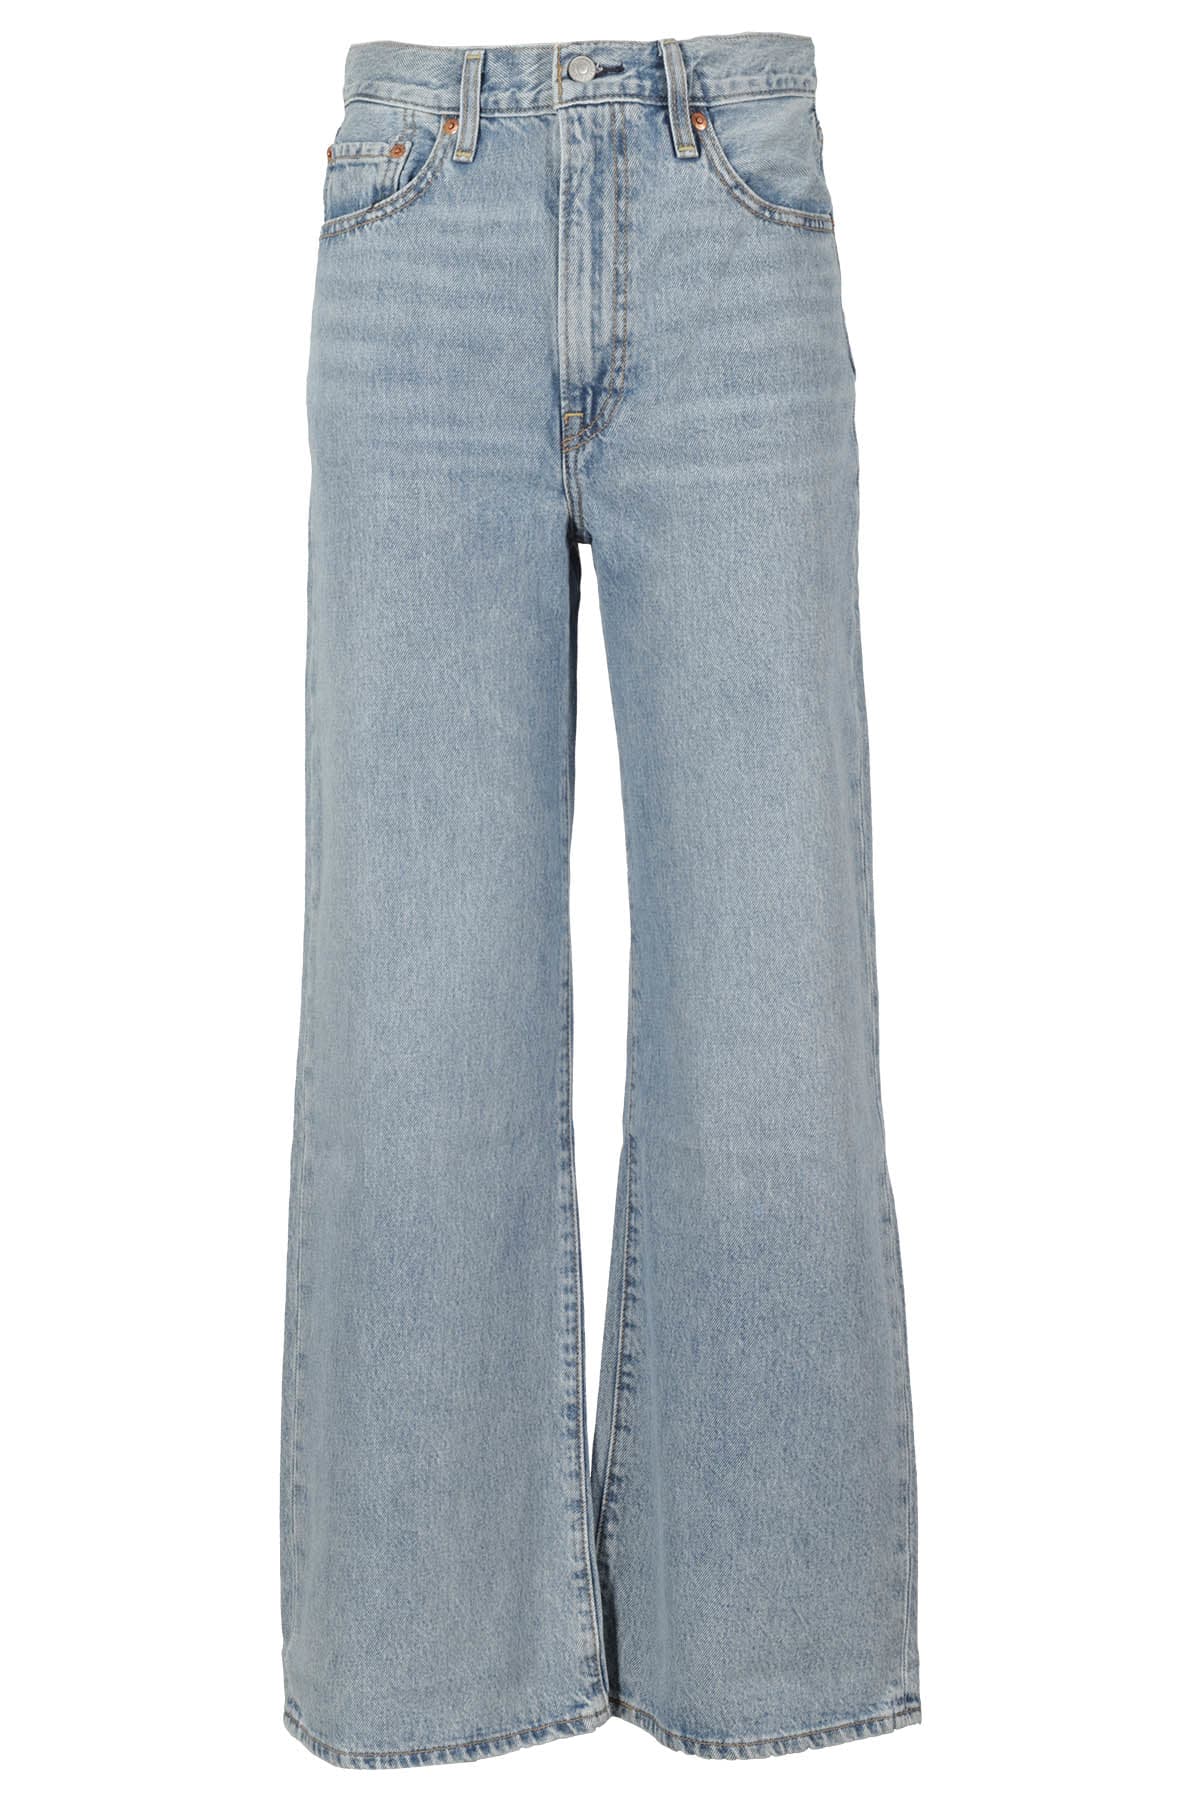 LEVI'S RIBCAGE WIDE LEG H223 FAR AND WIDE